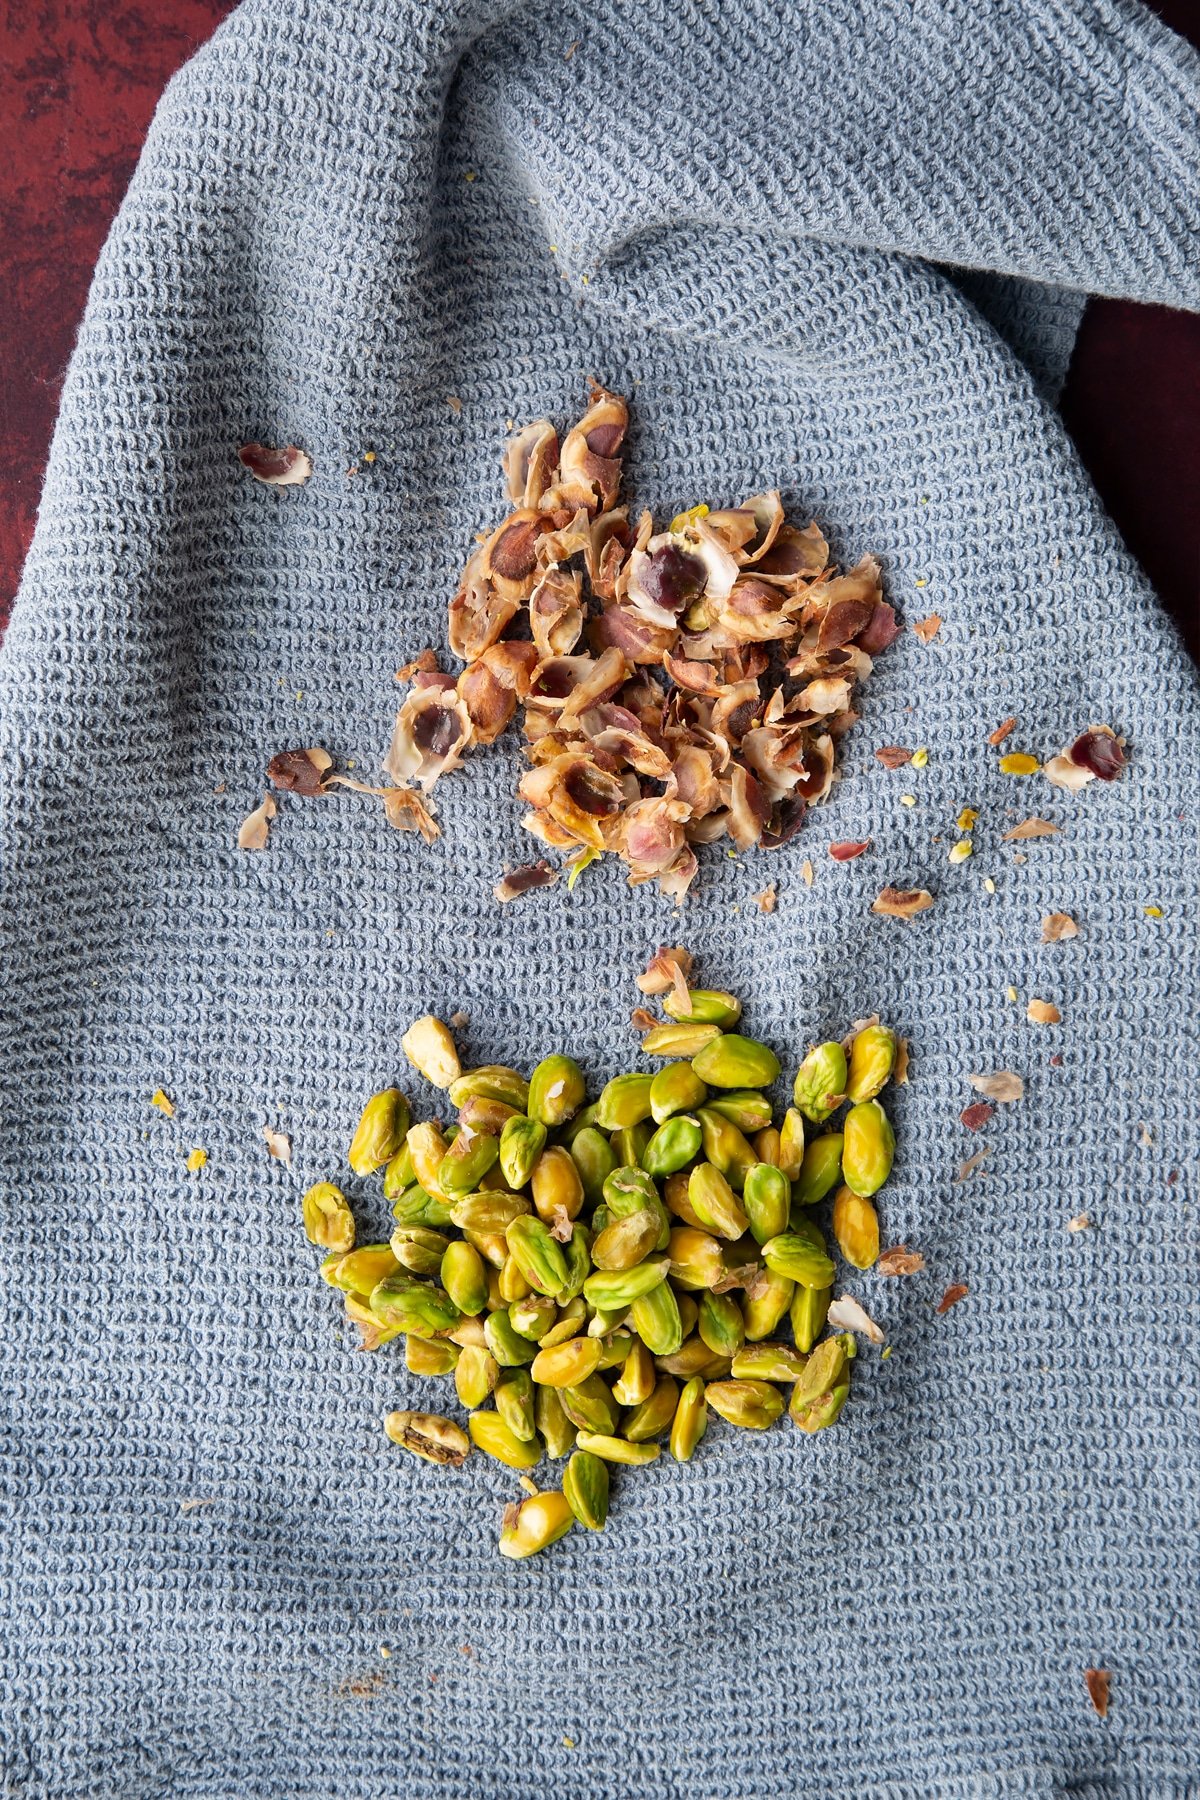 Overhead shot of the pistachios with the skins seperated.